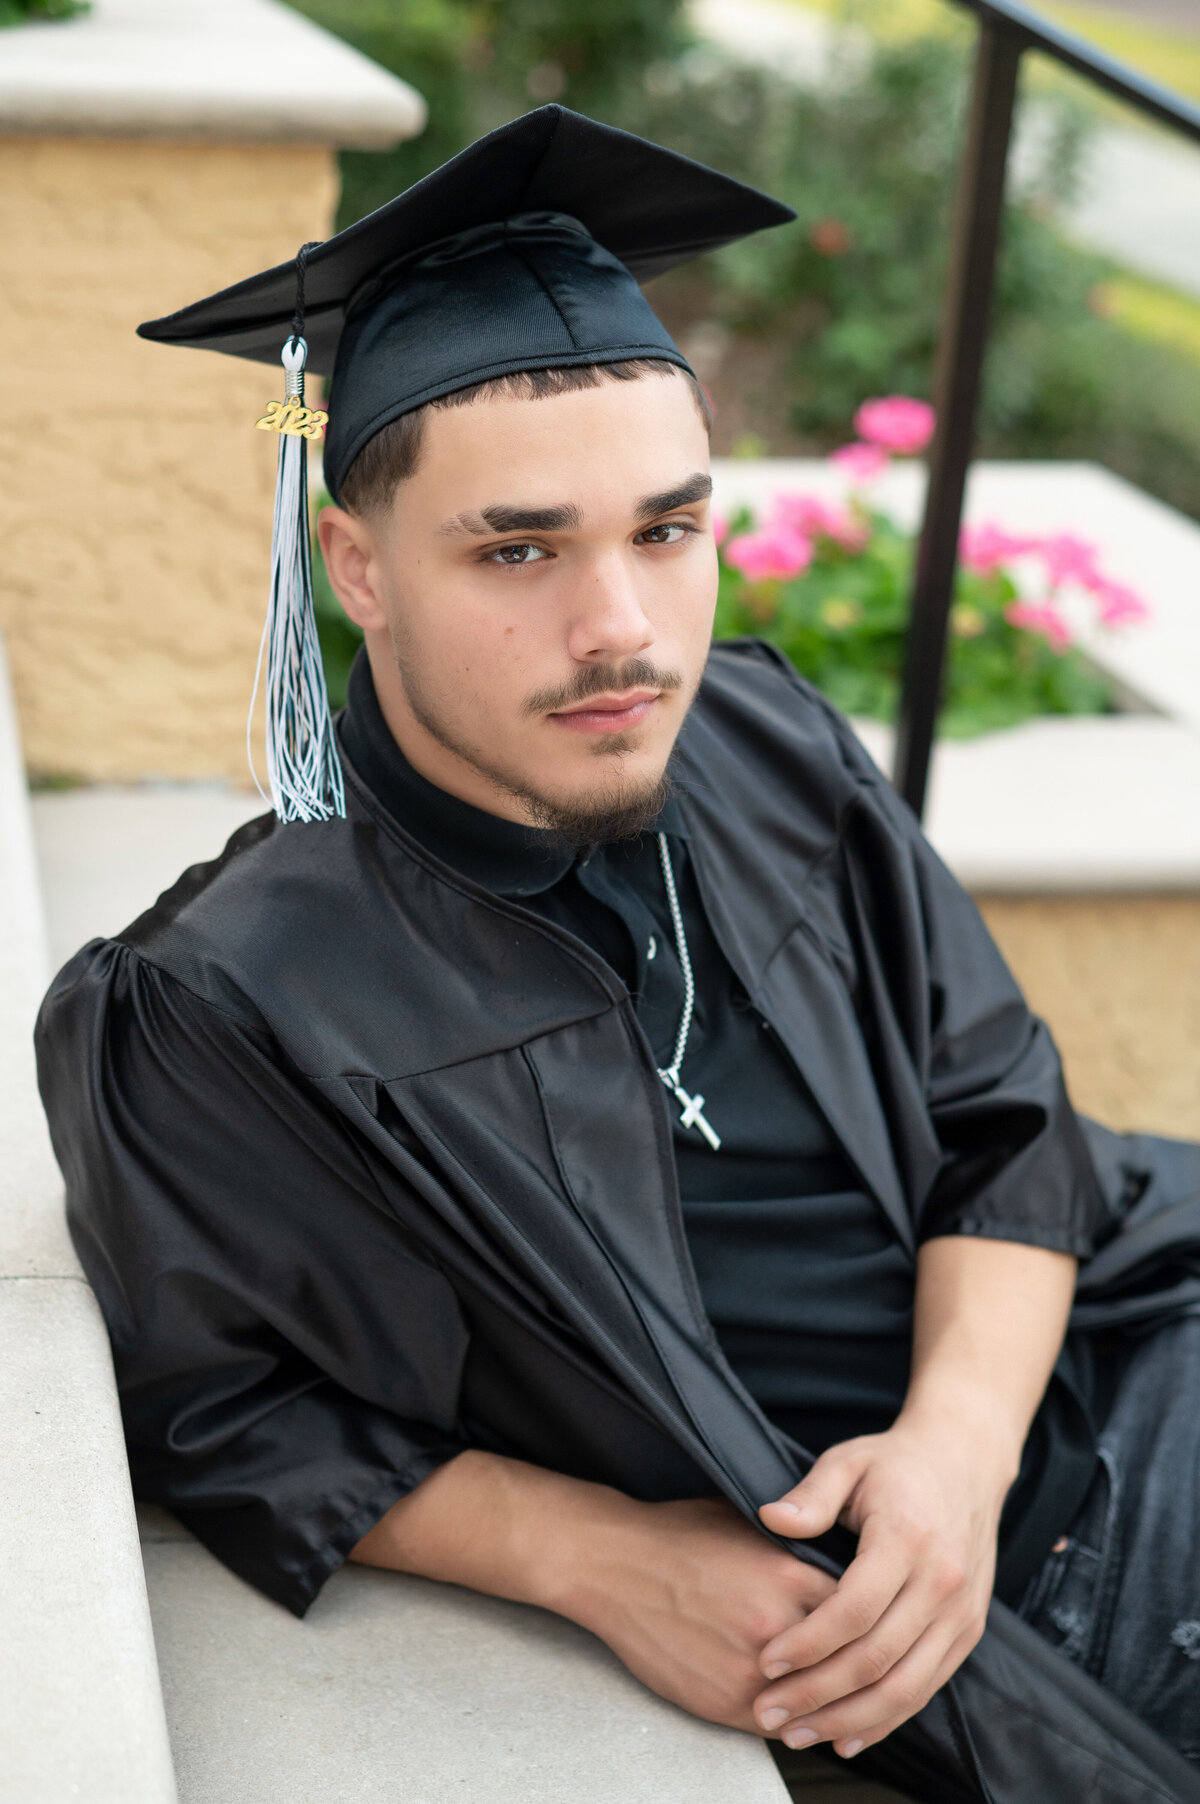 High school senior boy in cap and gown leans on stairs and looks into camera with a serious expression.